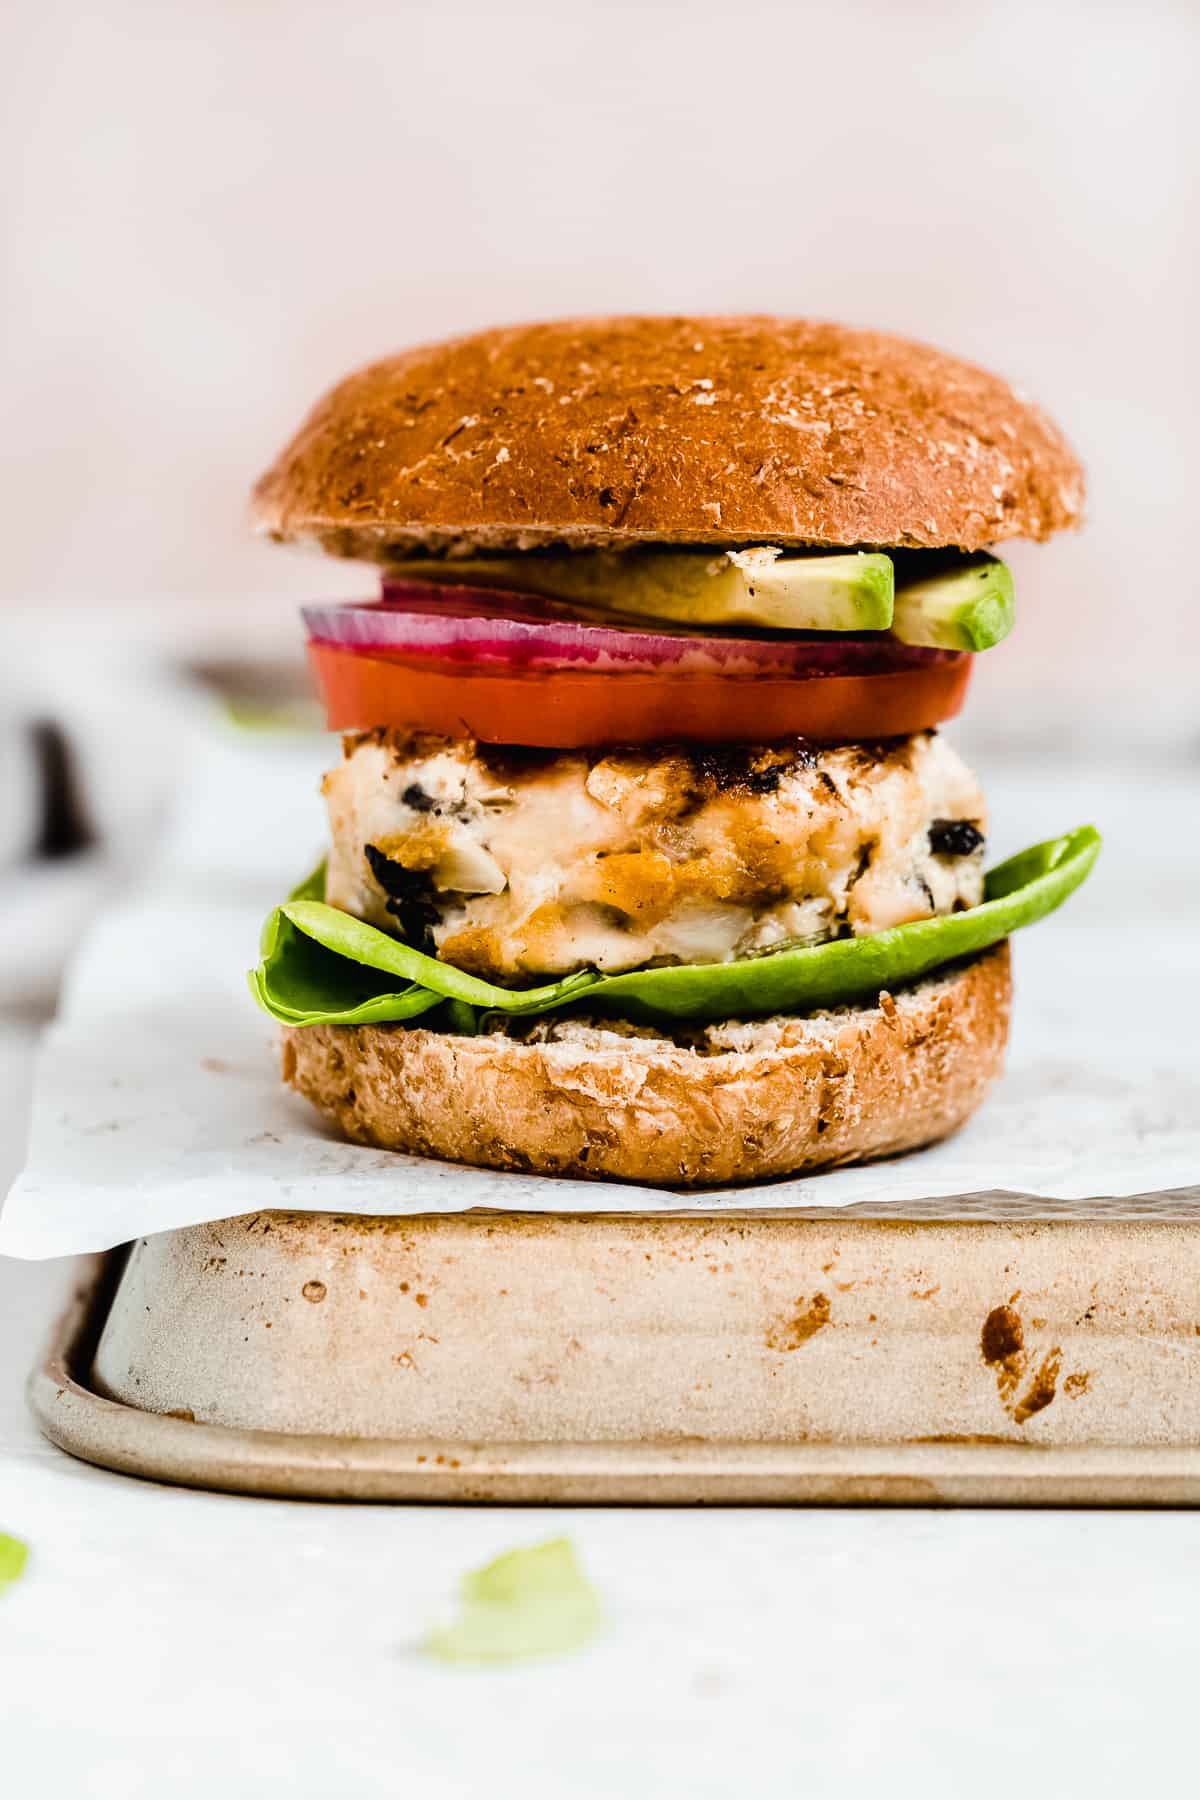 Turkey burger with lettuce and tomato and bun on top.